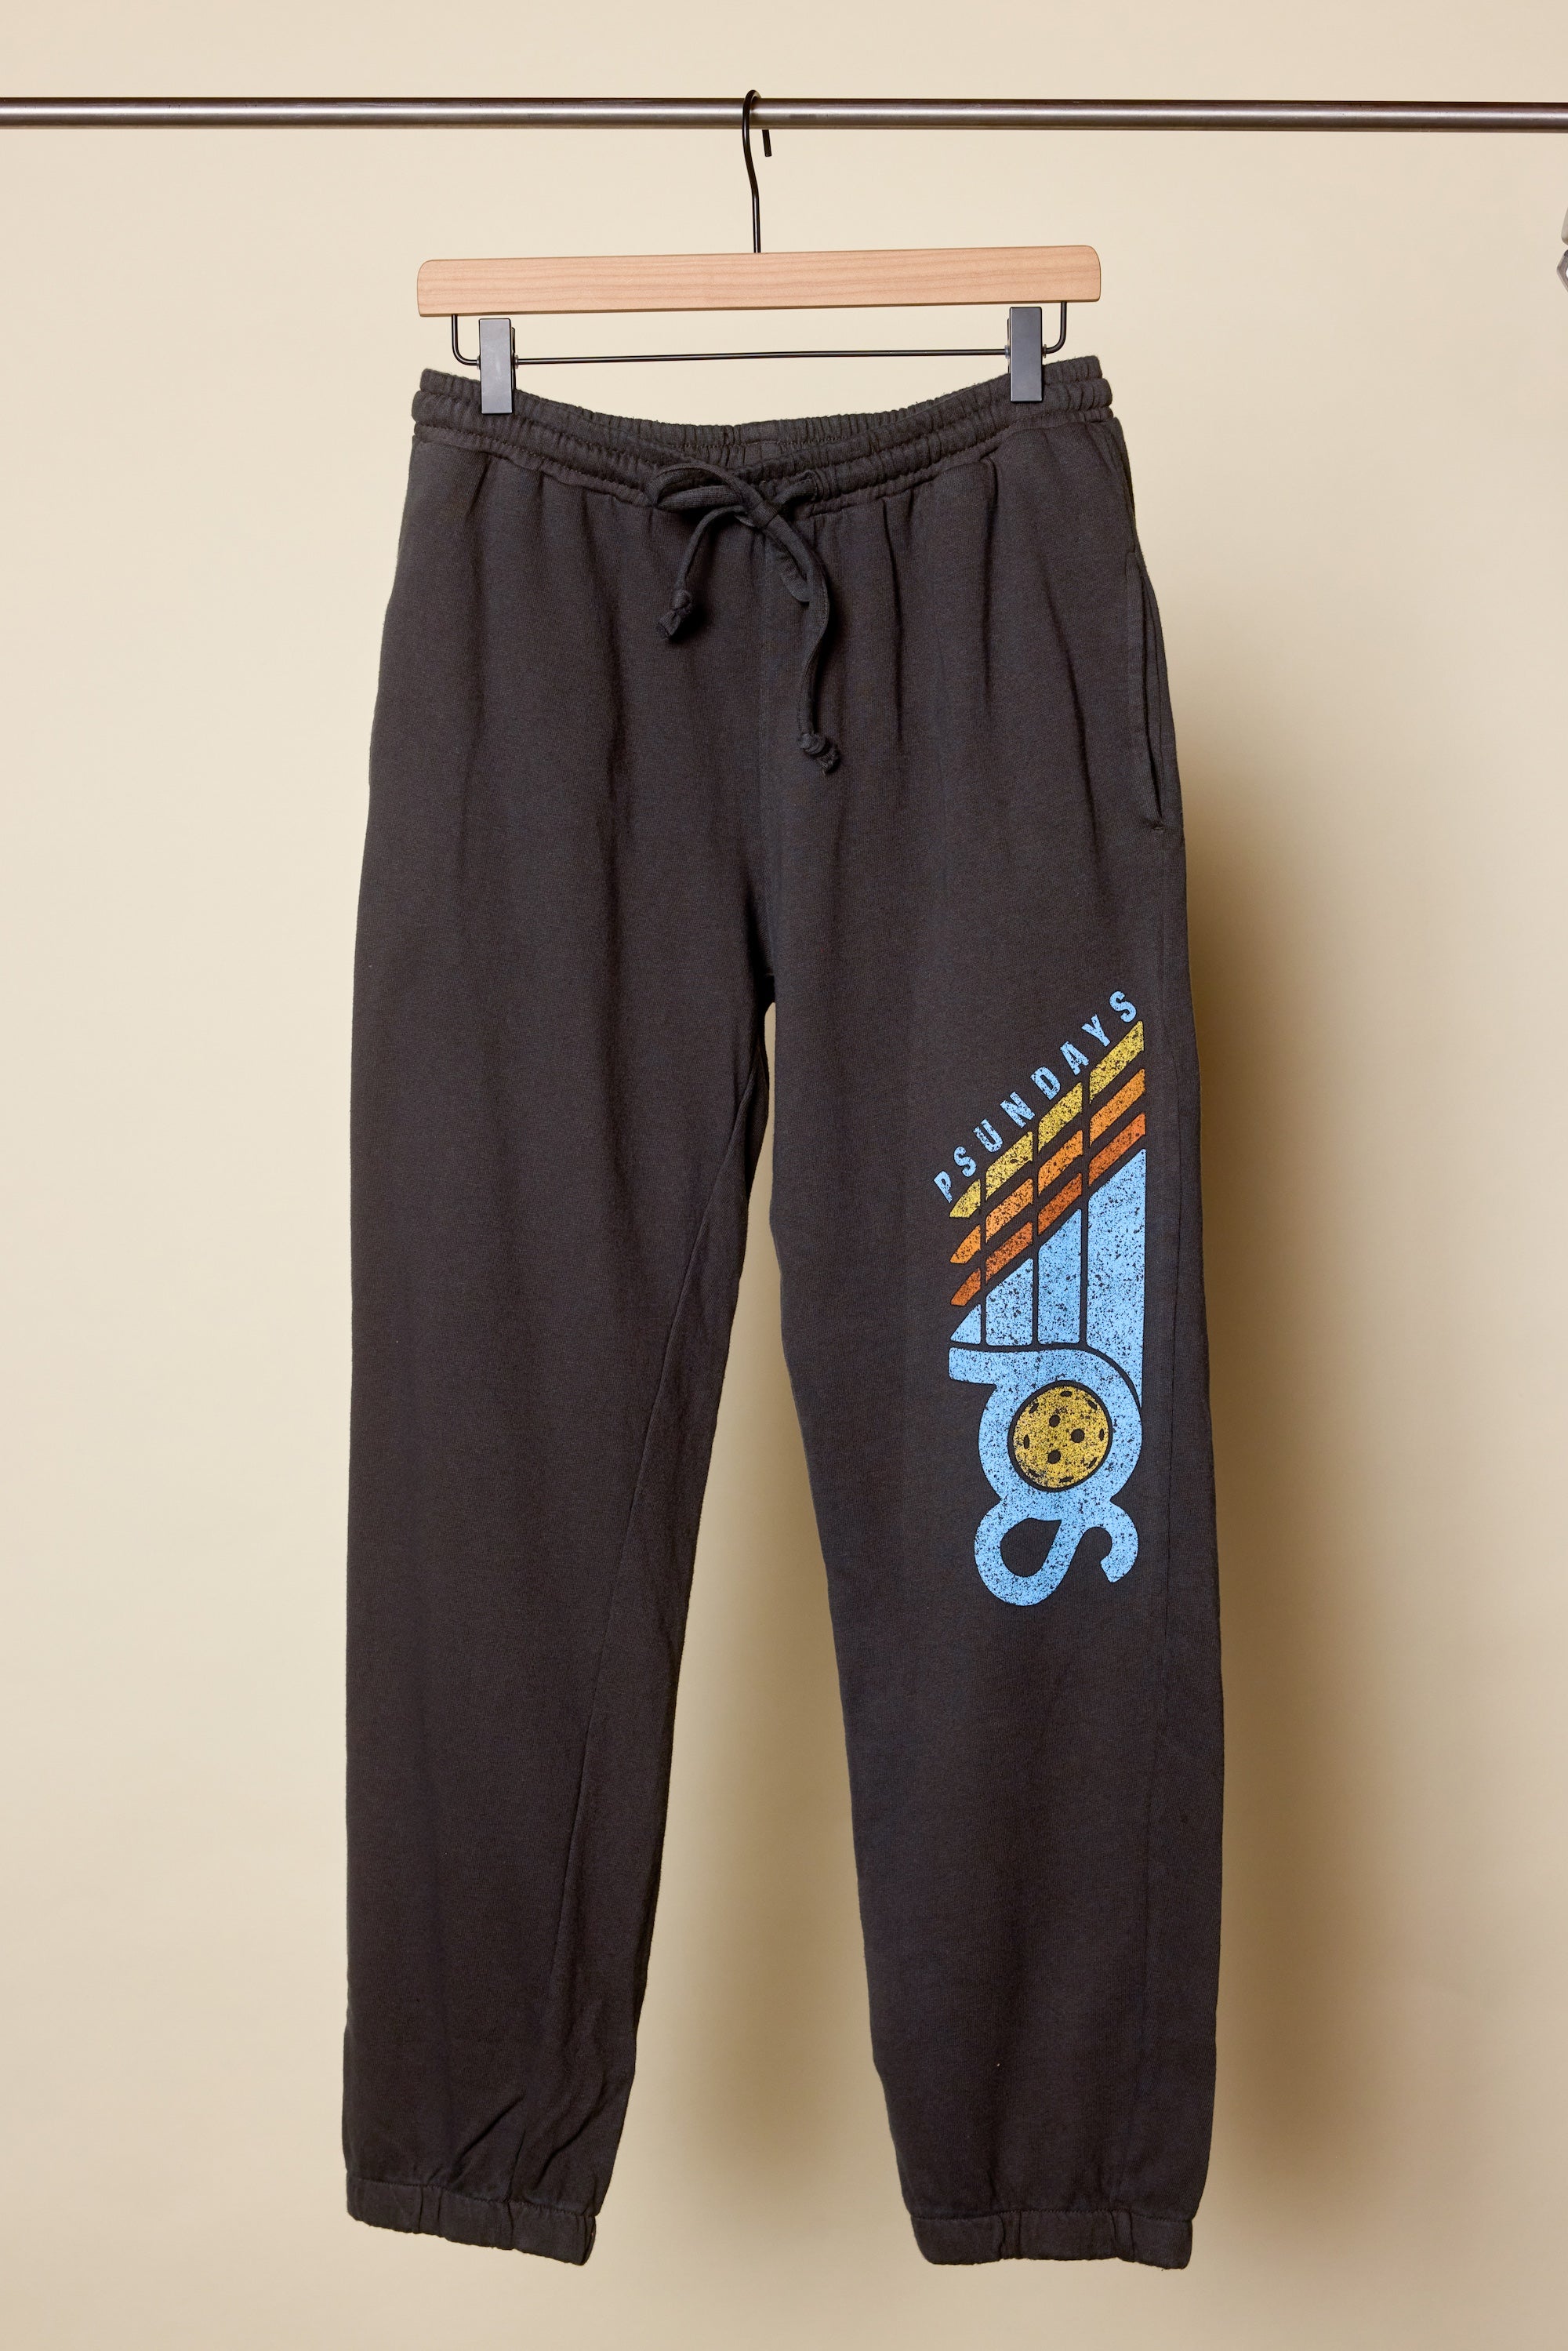 Topspin Court Sweats